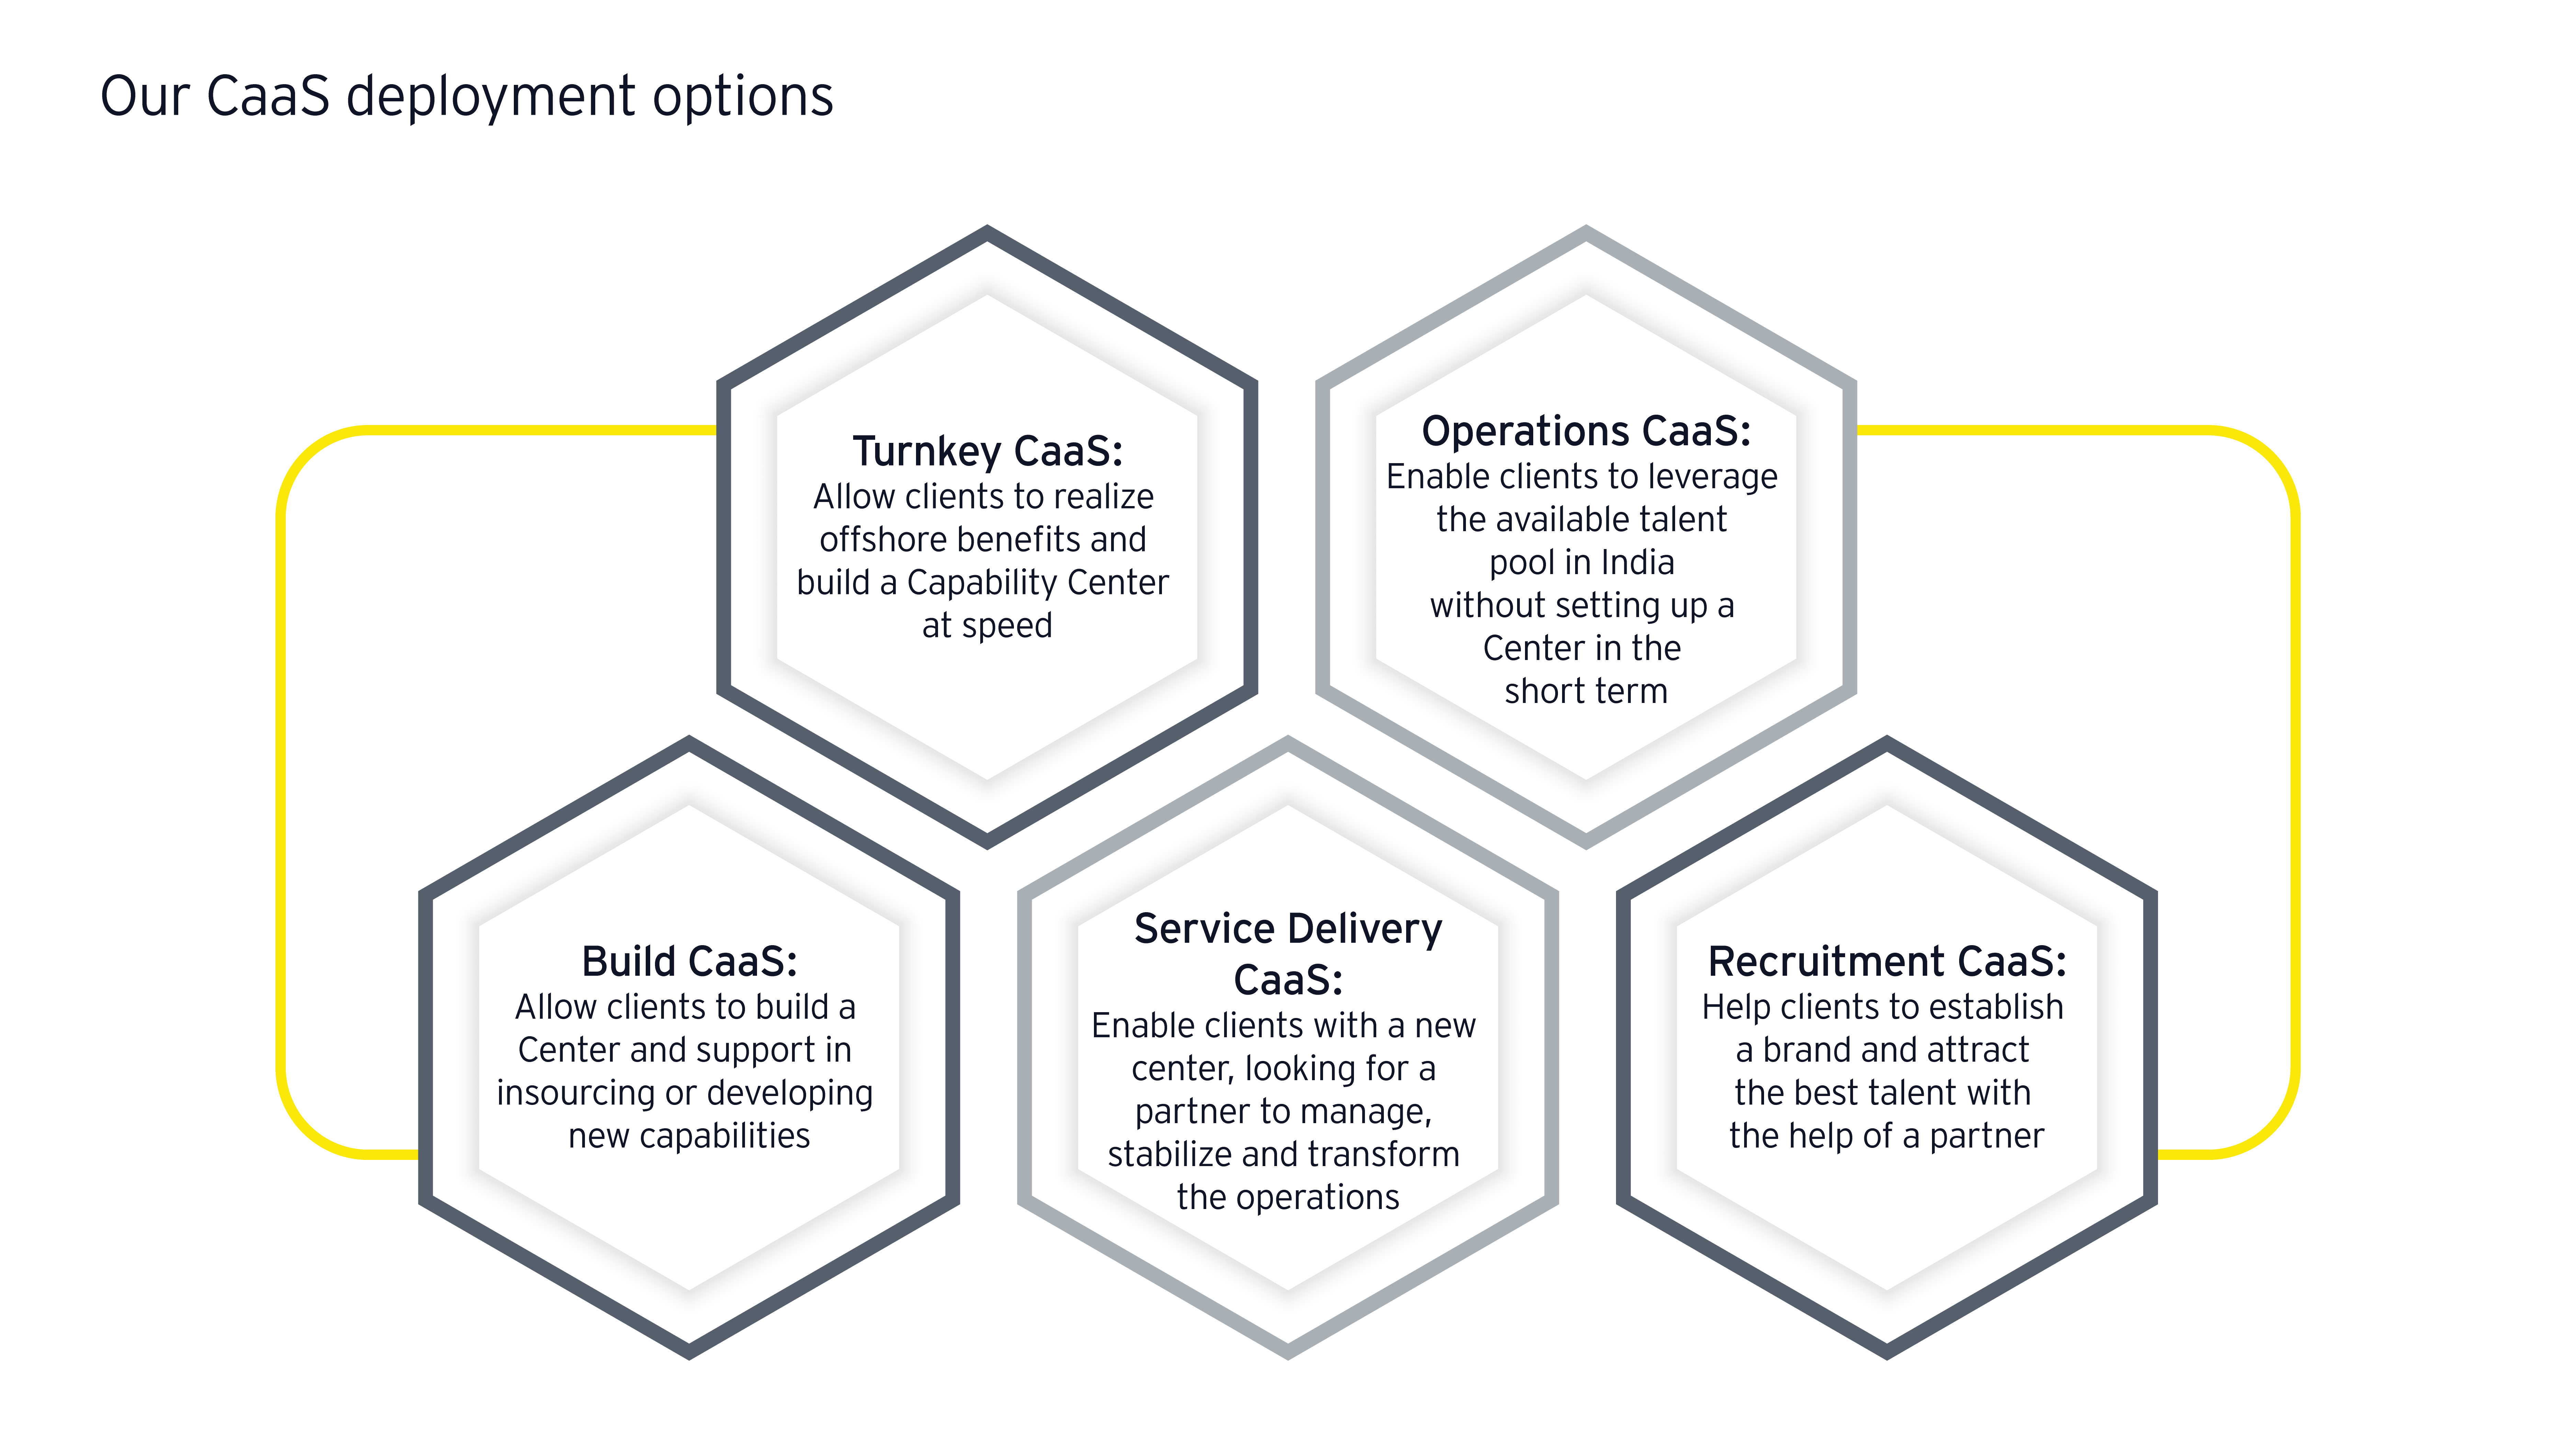 Our CaaS deployment options